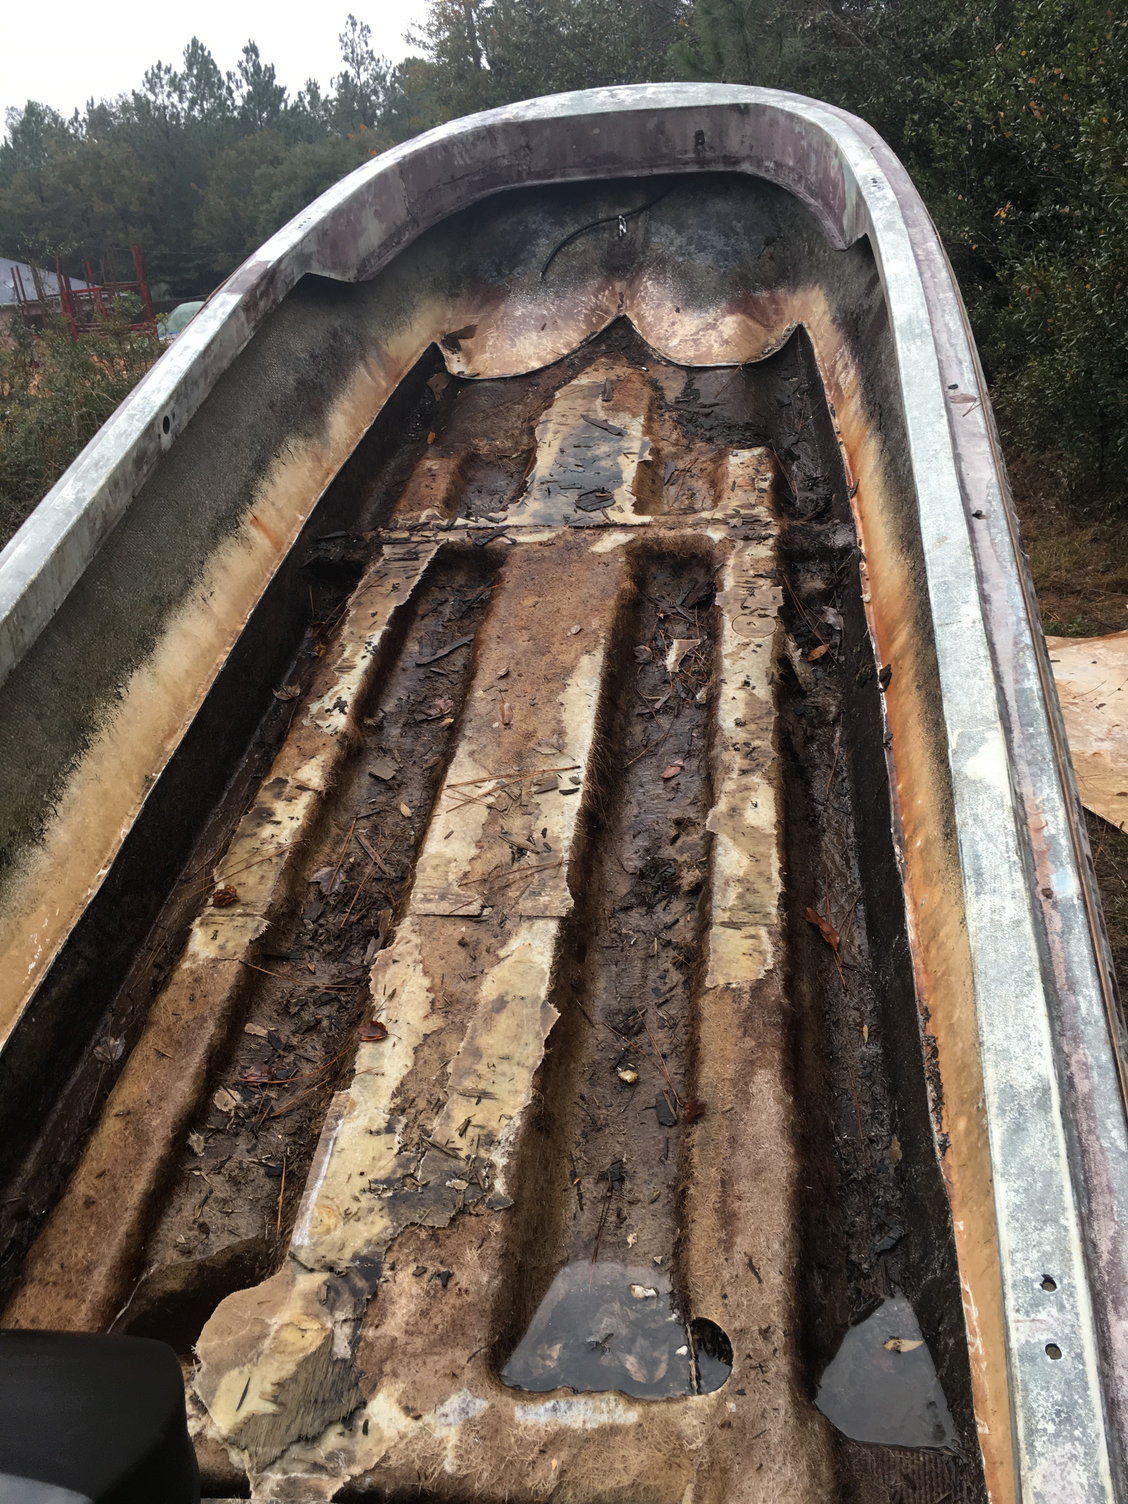 Hewes update: stringers are glassed and bulk heads are in. The hull in now  fixed… Skiff Life